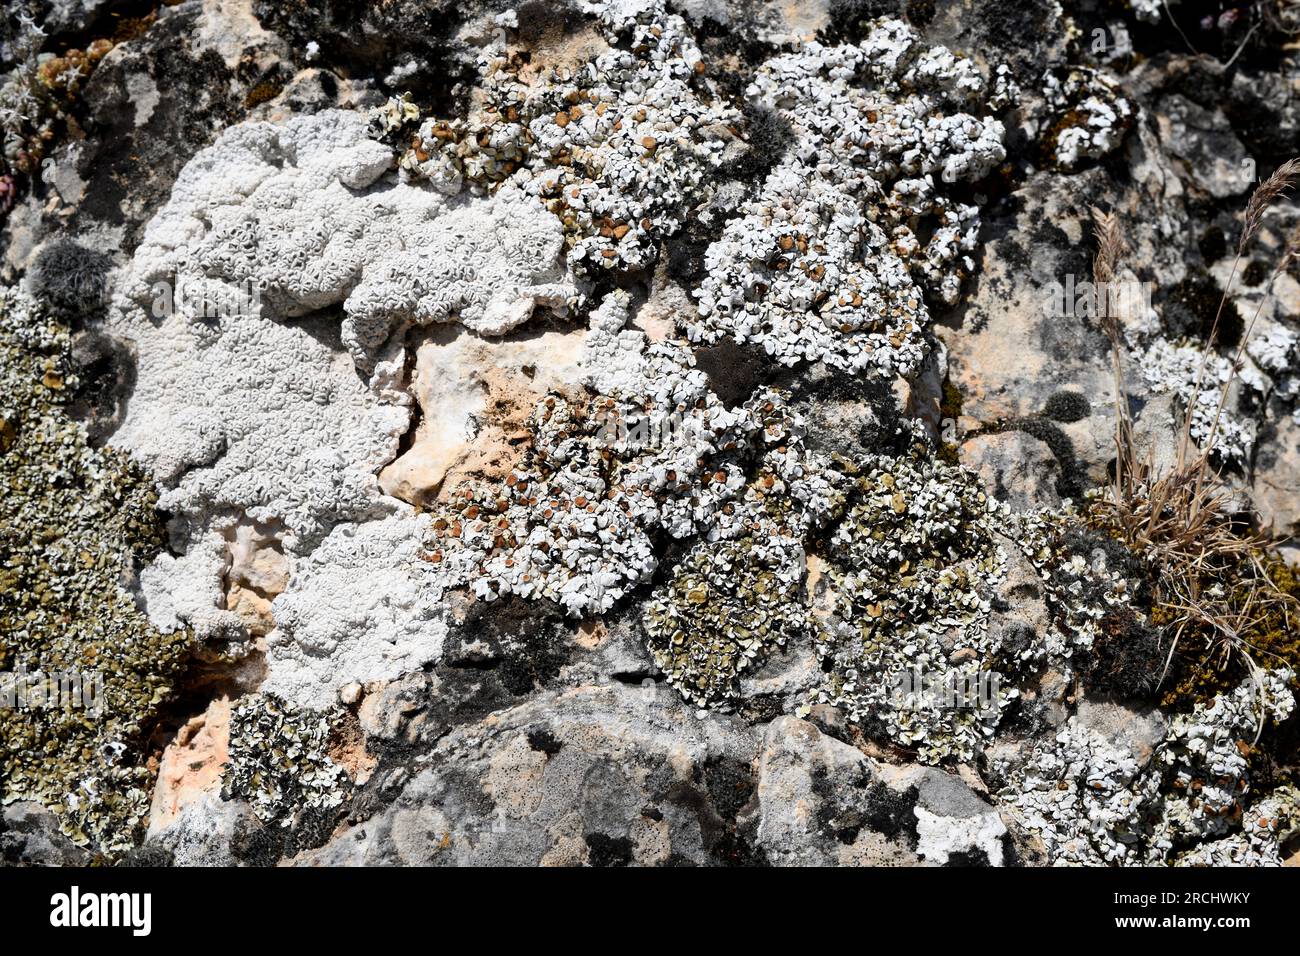 Squamarina lentigera (grey) and Squamarina cartilaginea (greenish) are a squamulose lichens that grows on calcareous rocks. This photo was taken in Se Stock Photo